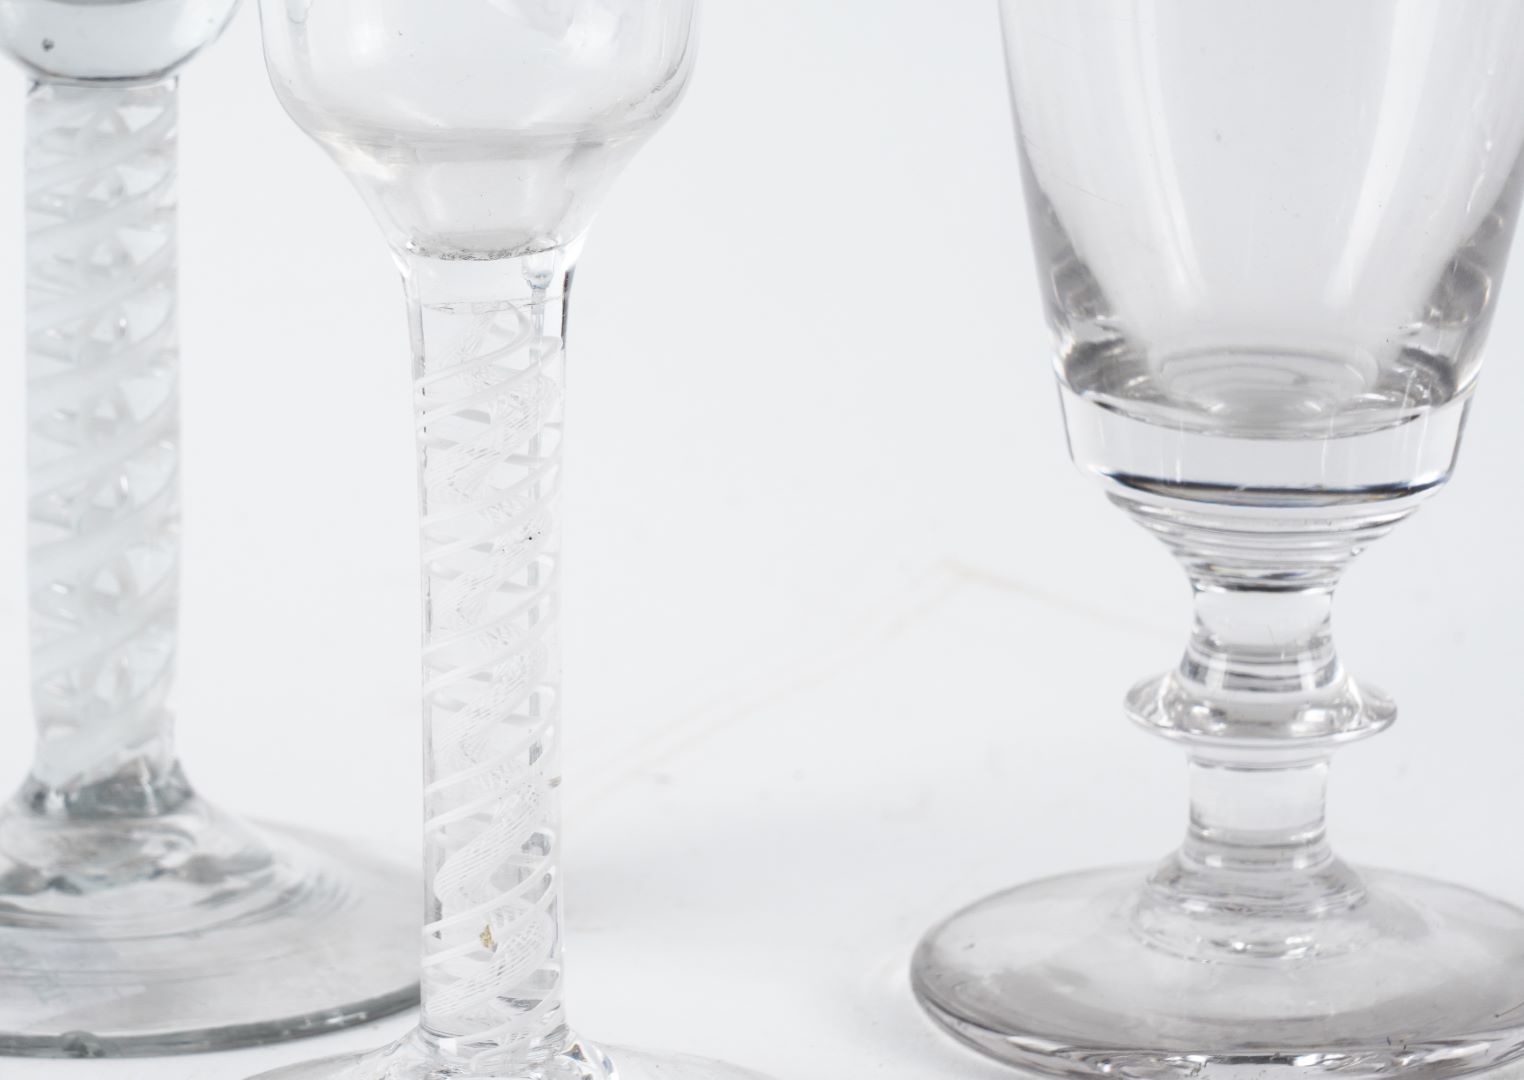 A GROUP OF FIVE DRINKING GLASSES - Image 2 of 2